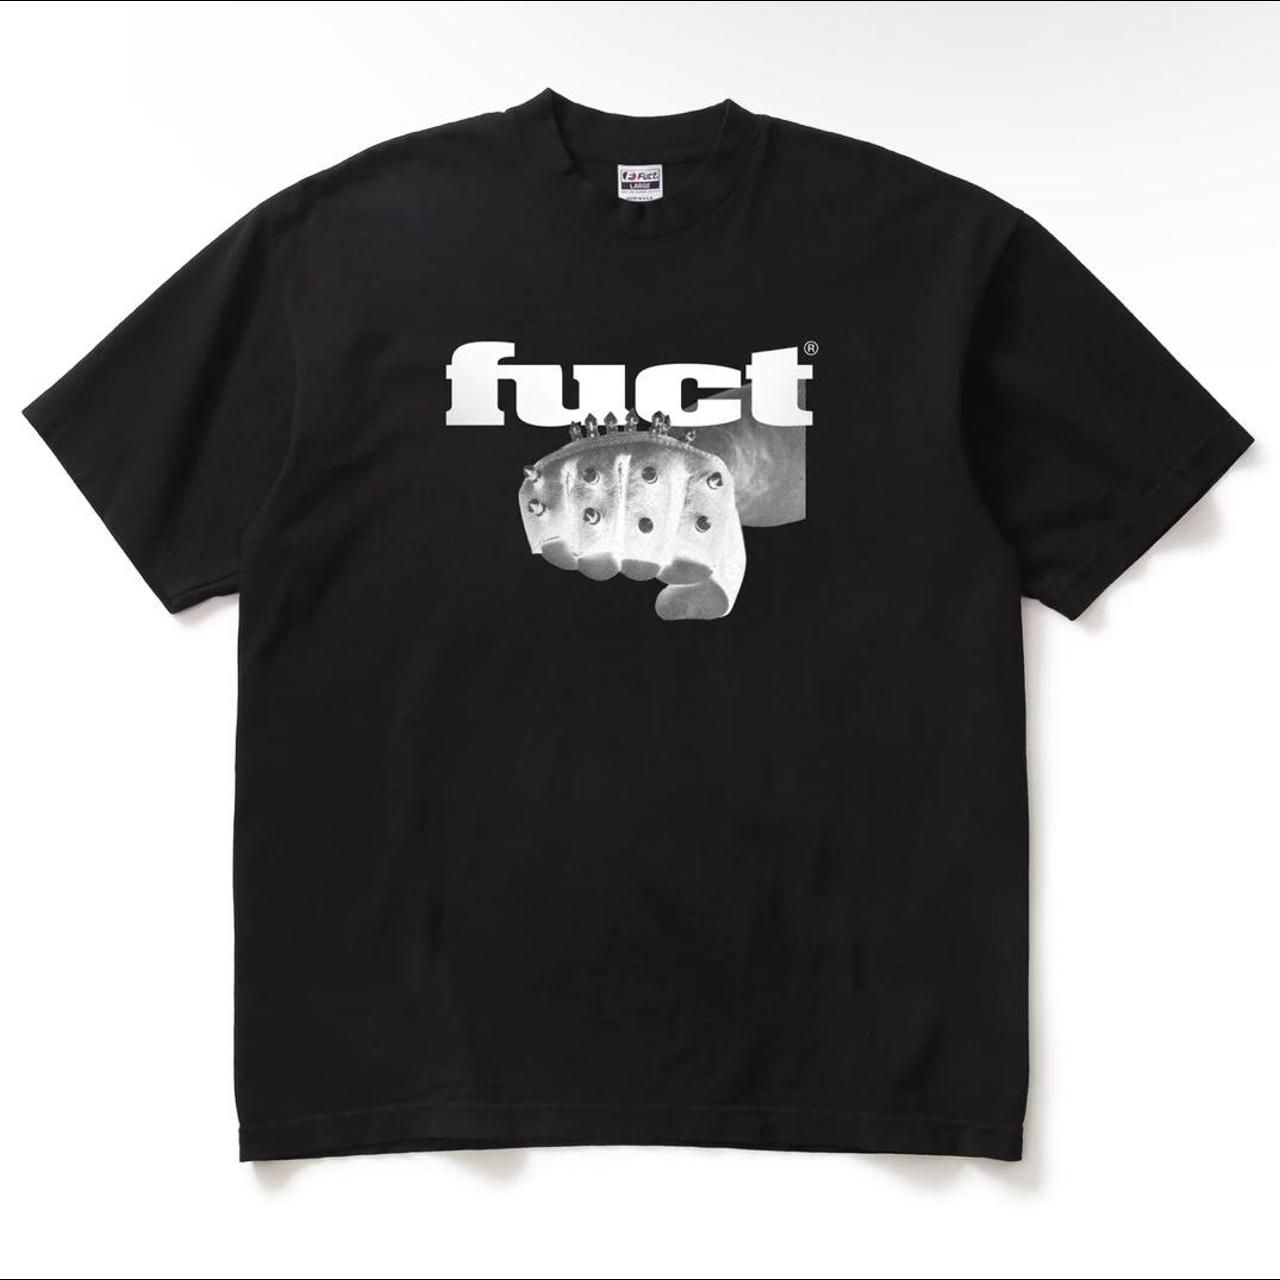 Product Image 2 - FUCT Fist Tee 👊🏼

‼️ DEADSTOCK